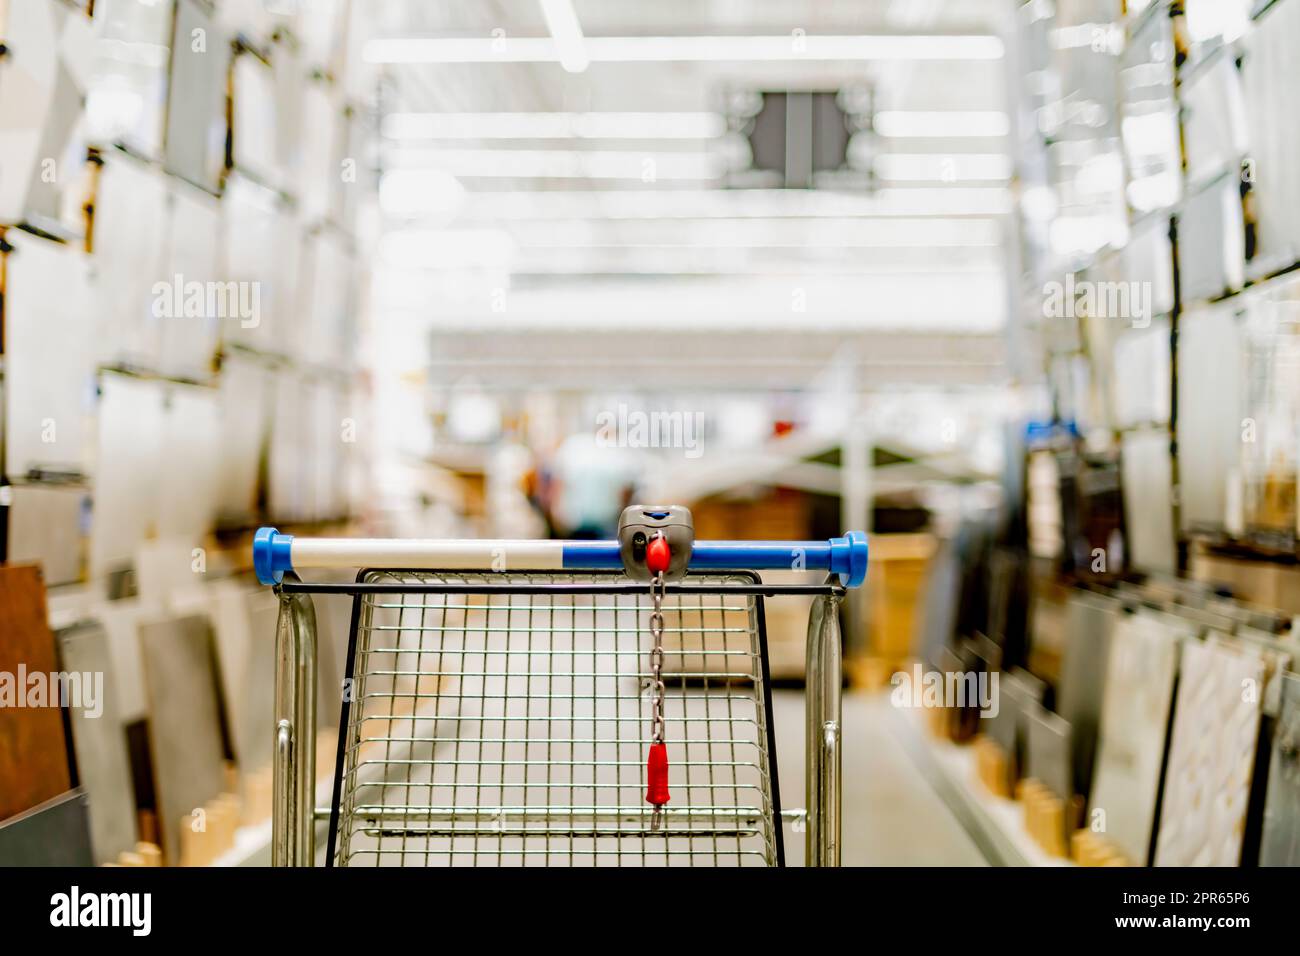 A shopping cart in a home improvement store Stock Photo